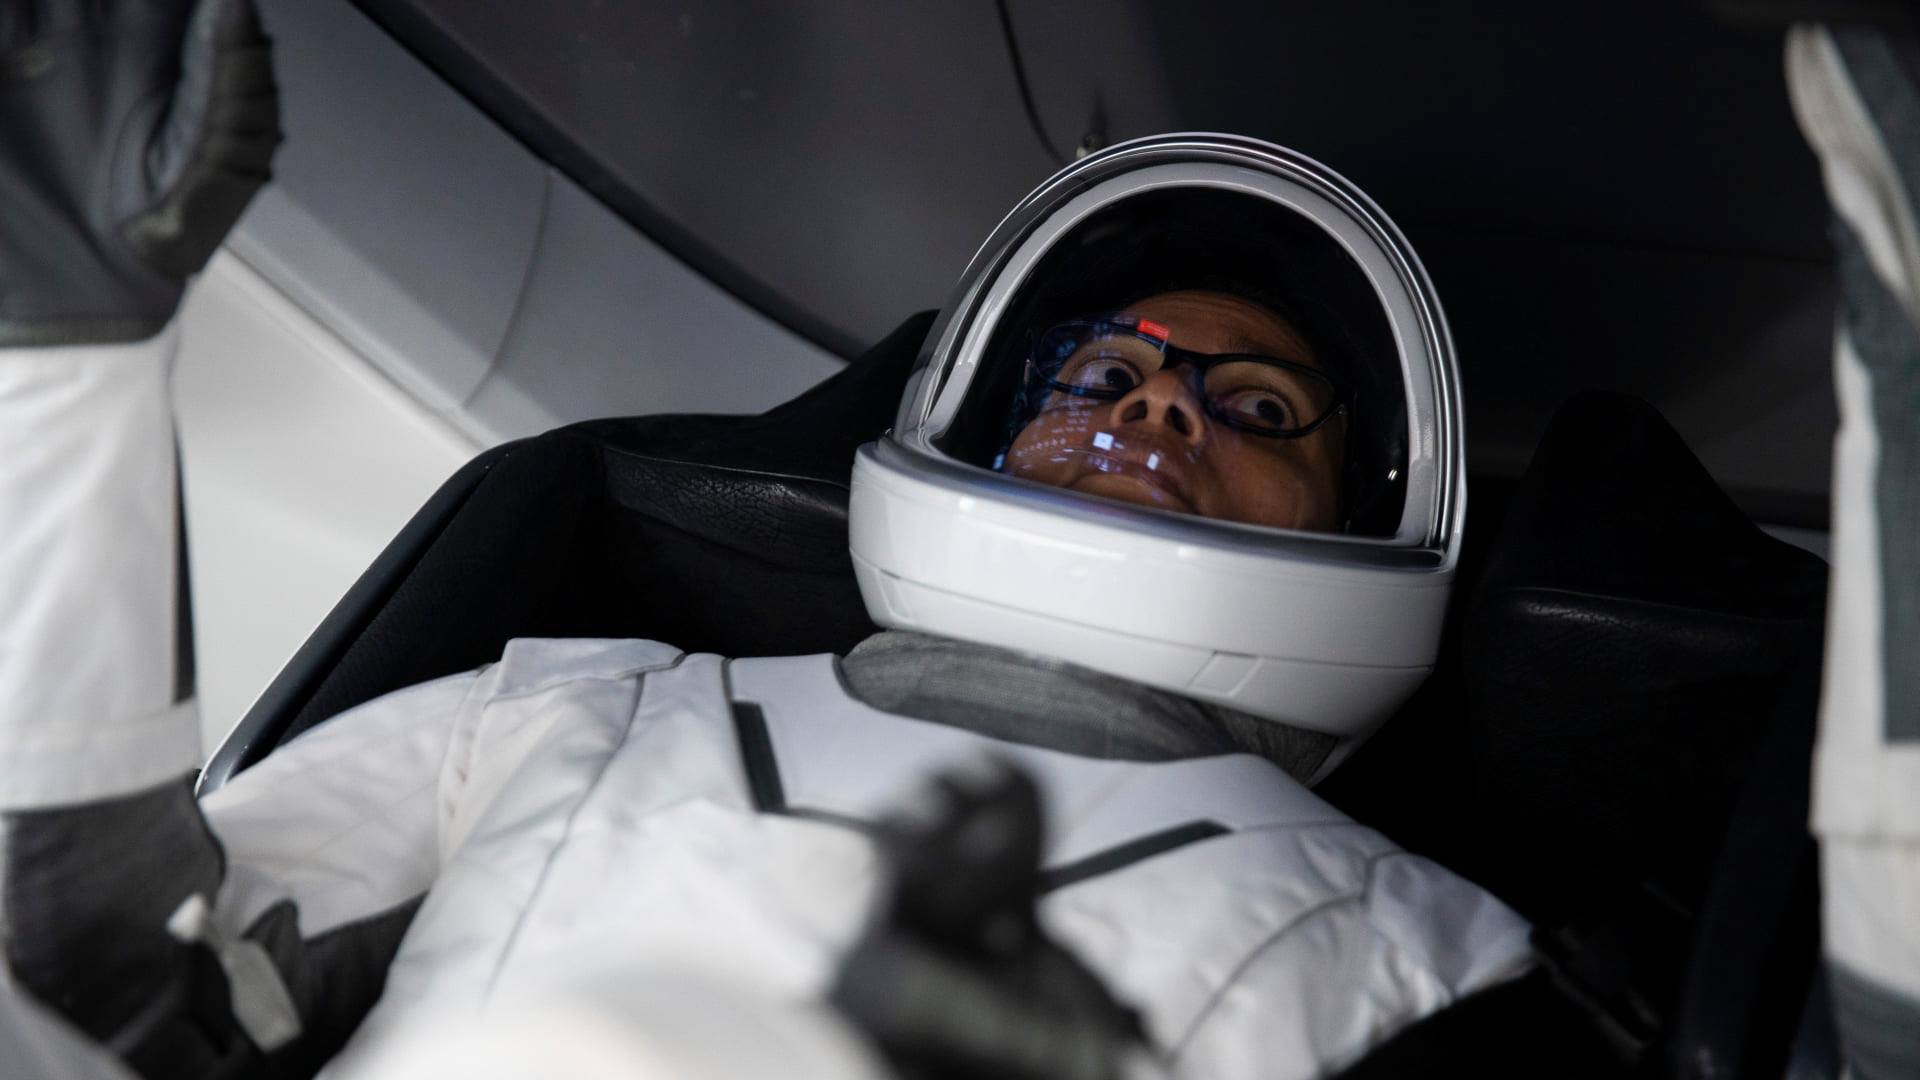 Sian Proctor in an astronaut suit during a training simulation